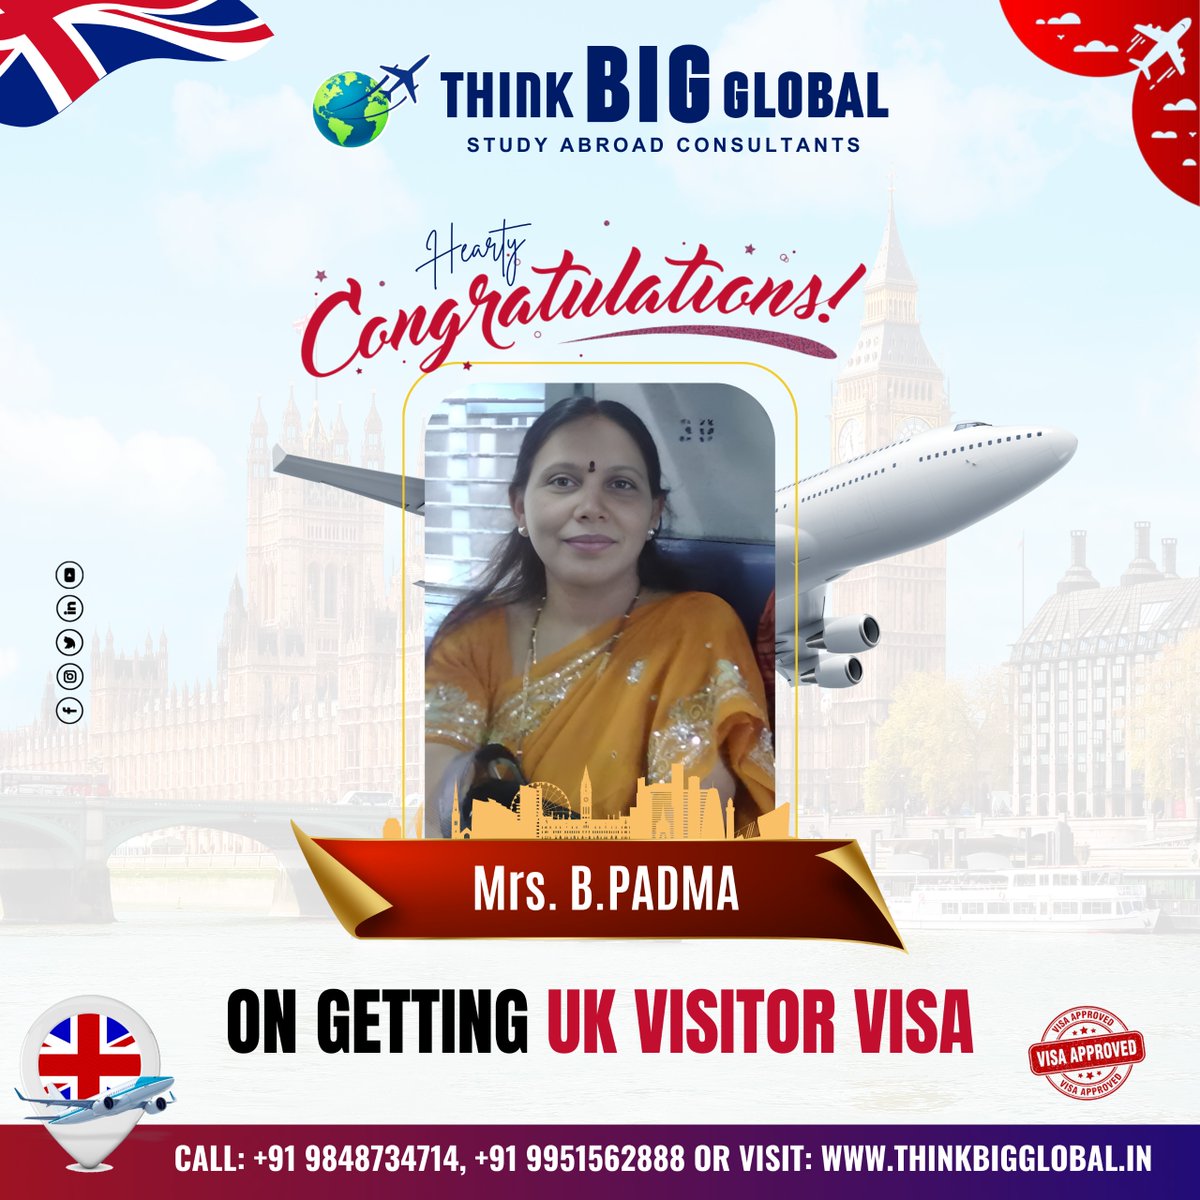 🎉 Hearty Congratulations! 🎉
Mrs. B.PADMA on getting UK Visitor Visa!
ISA APPROVED!

📞 Call: +91 9848734714, +919951562888
🌐 Visit: thinkbigglobal.in

#Congratulations #UKVisitorVisa #ThinkBigGlobal #VisaApproved #ISAApproved #TravelVisa #UKTravel